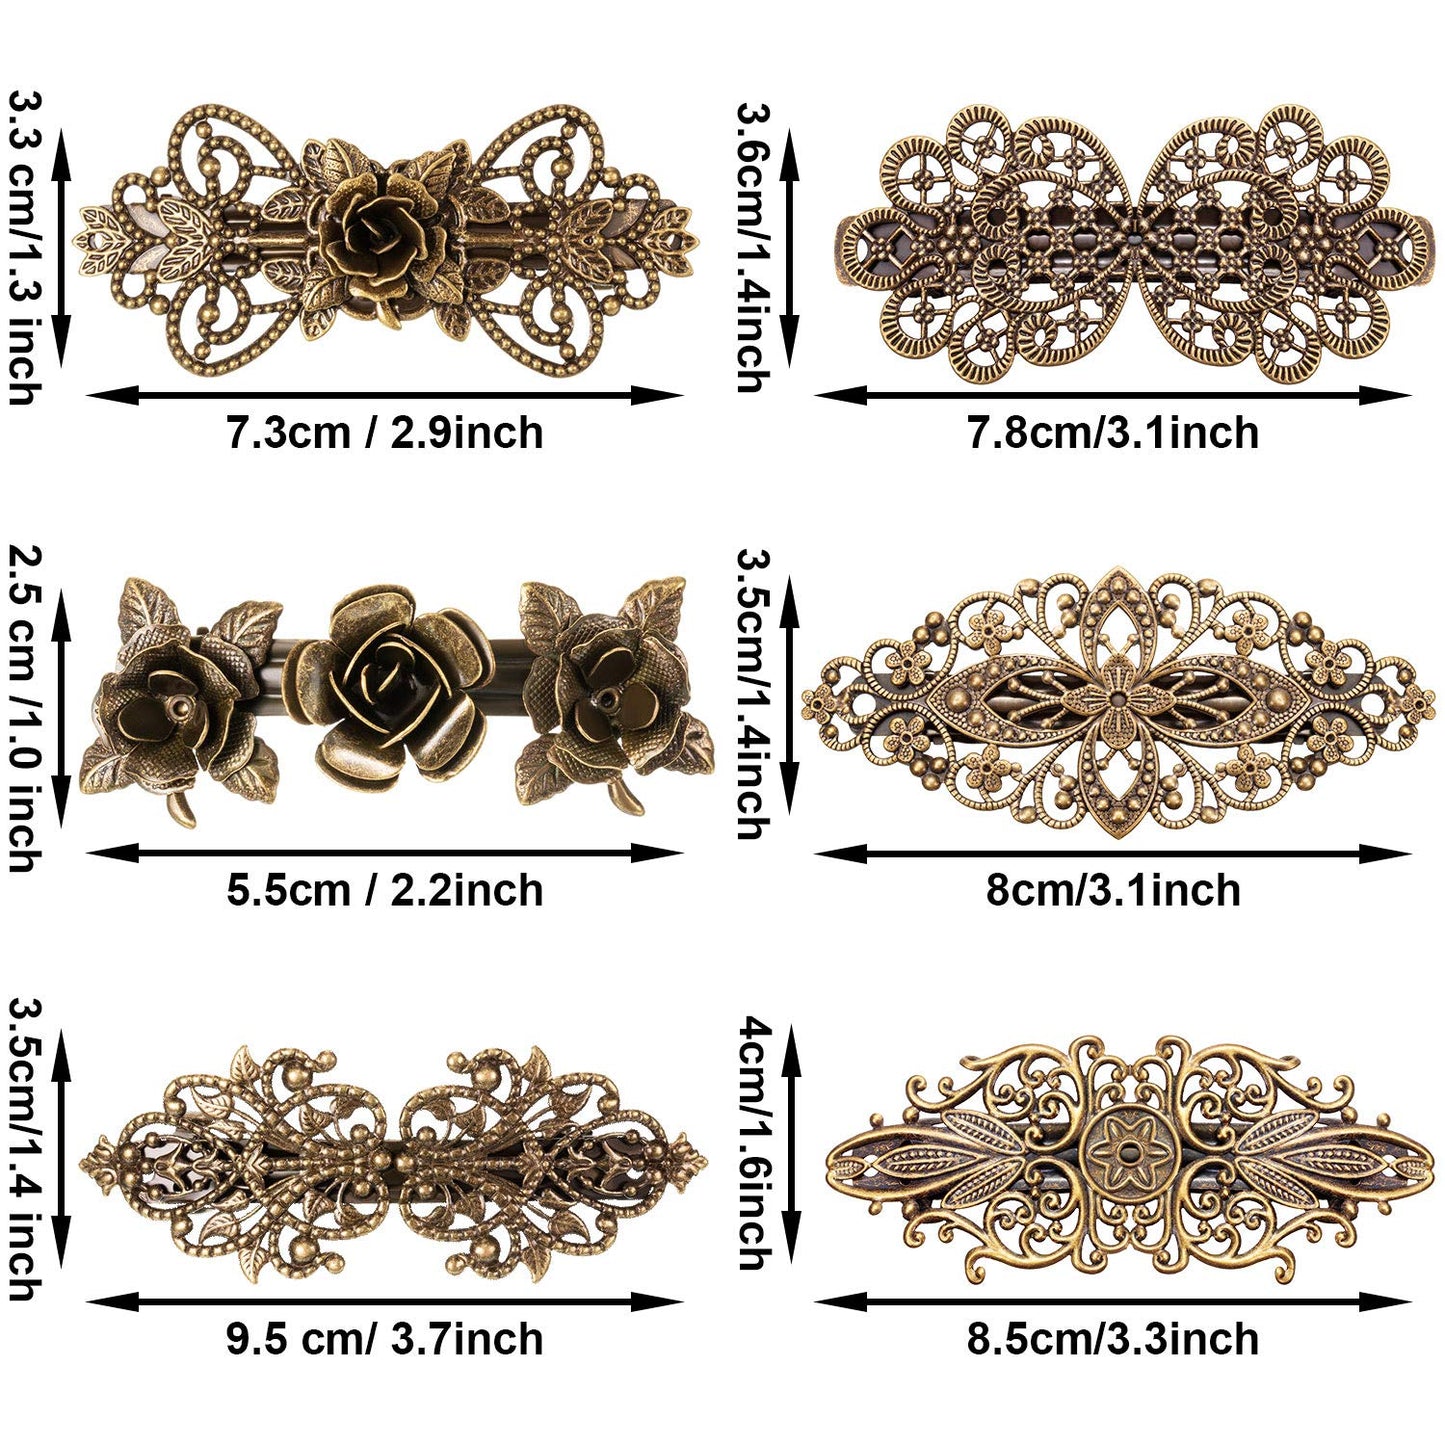 6 Pieces Vintage Hair Barrettes/ Clips for Women Retro French flower Metal Bronze Girl Hair Styling Pins/ Accessories